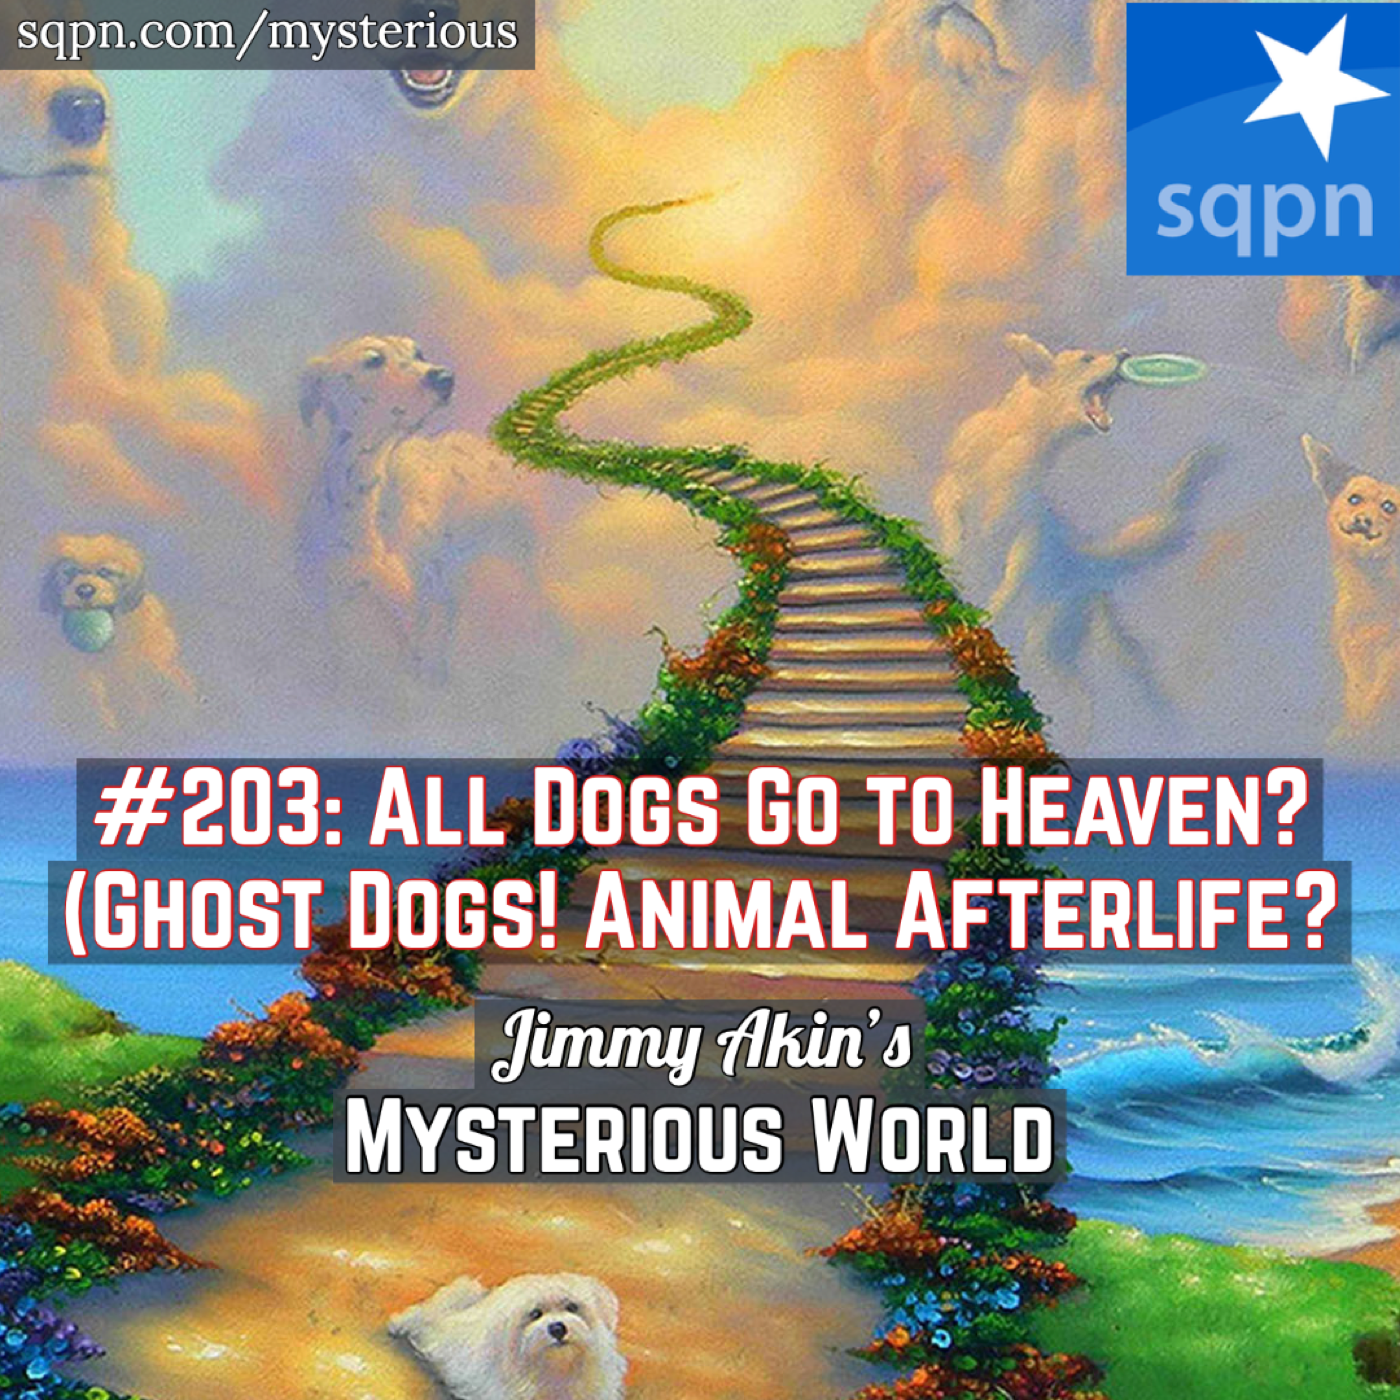 All Dogs Go to Heaven? (Ghost Dogs! Animal Afterlife?)